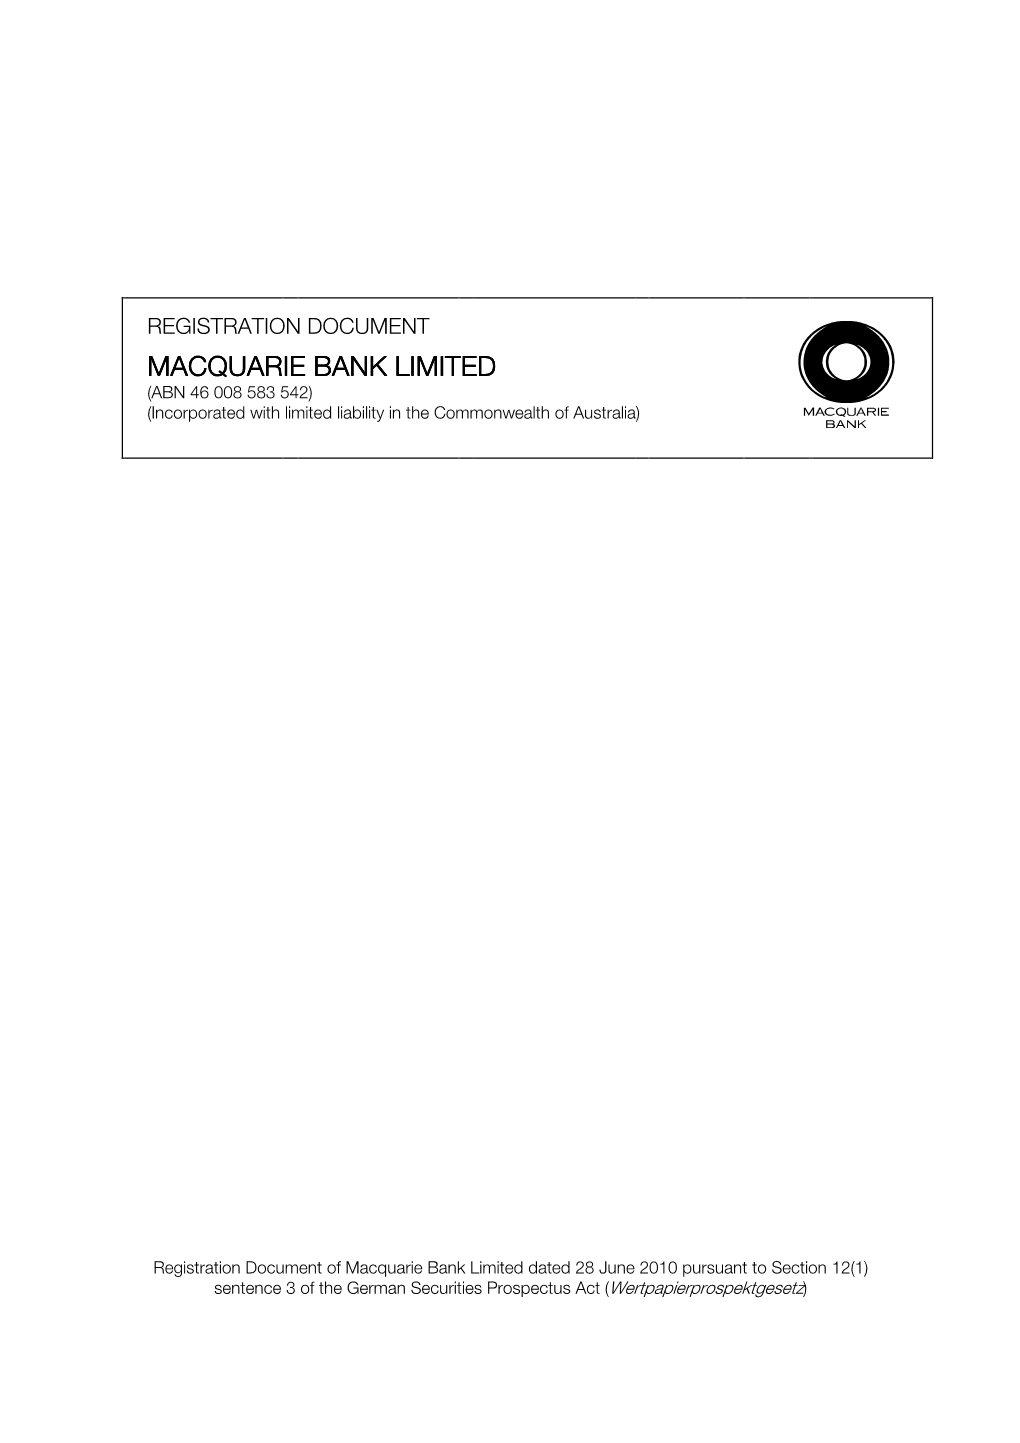 REGISTRATION DOCUMENT MACQUARIE BANK LIMITLIMITEDEDEDED (ABN 46 008 583 542) (Incorporated with Limited Liability in the Commonwealth of Australia)